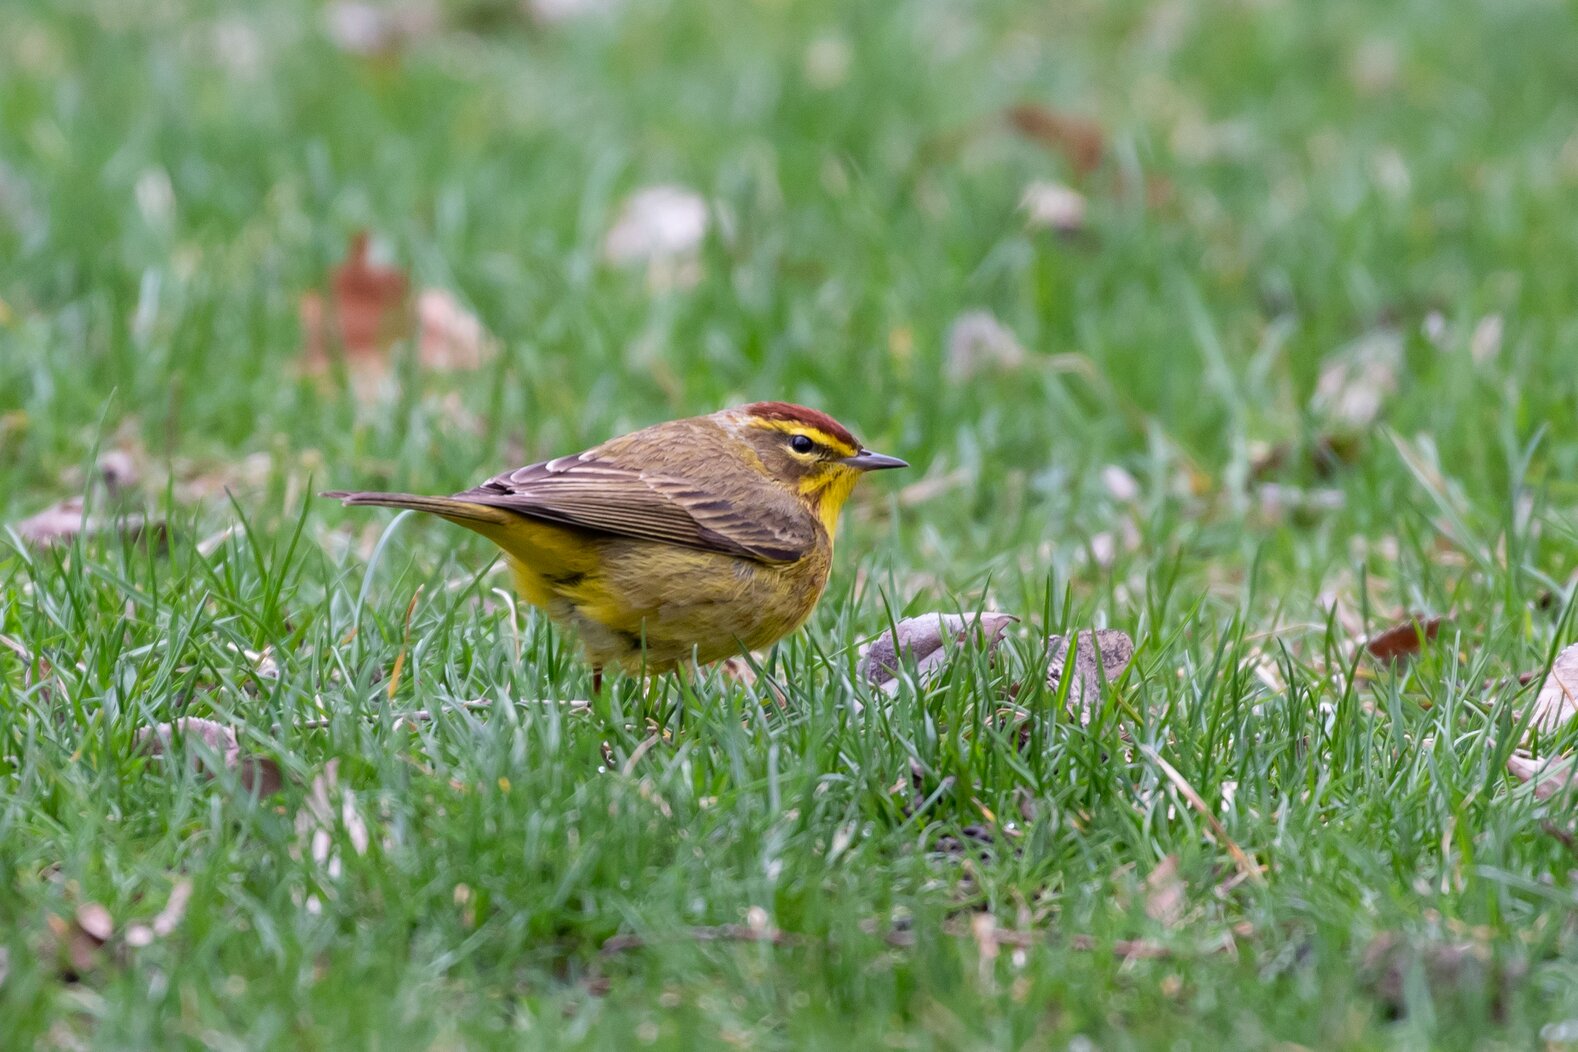 Tail-bobbing Palm Warblers are frequent visitors to the Madison Square Park’s lawn and low shrub borders. Photo: Ryan F. Mandelbaum